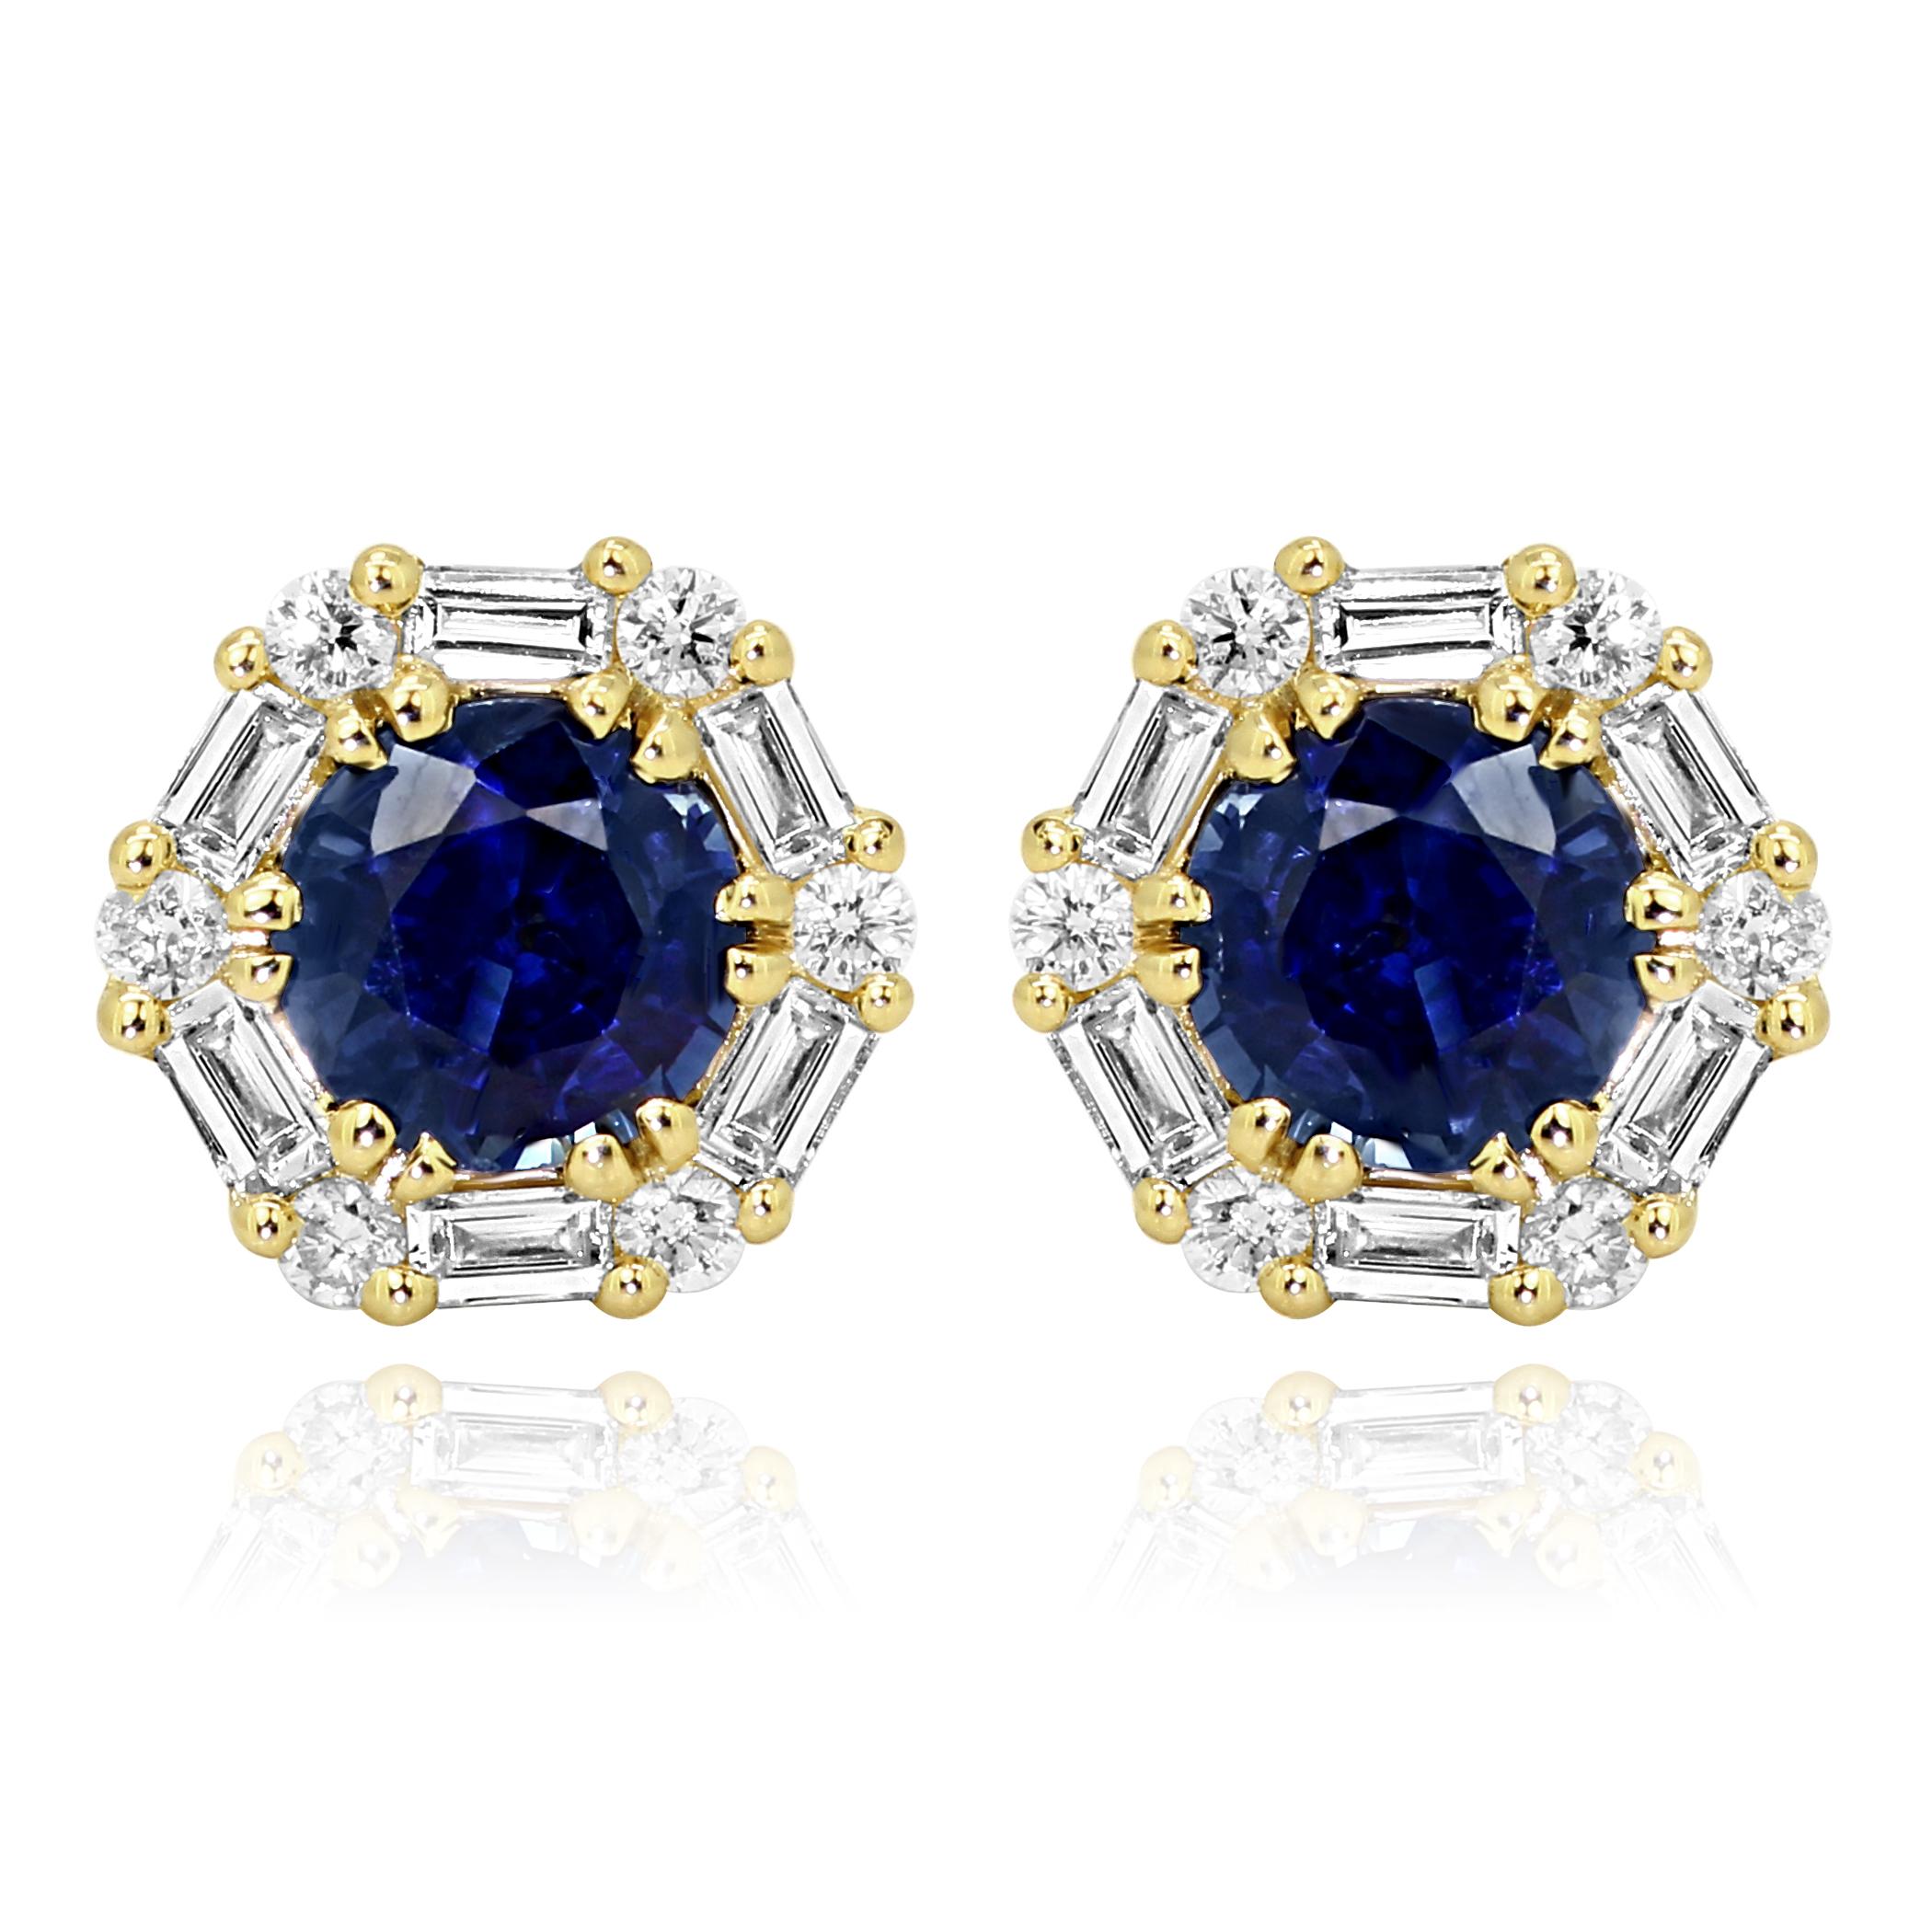 2 Blue Sapphire Round 1.39 Carat Encircled in a Halo White Diamond Round 0.13 Carat and White  Diamond Baguettes 0.24 Carat in 14K Yellow Gold Gorgeous Earring.

Style available in different price ranges. Prices are based on your selection of 4C's